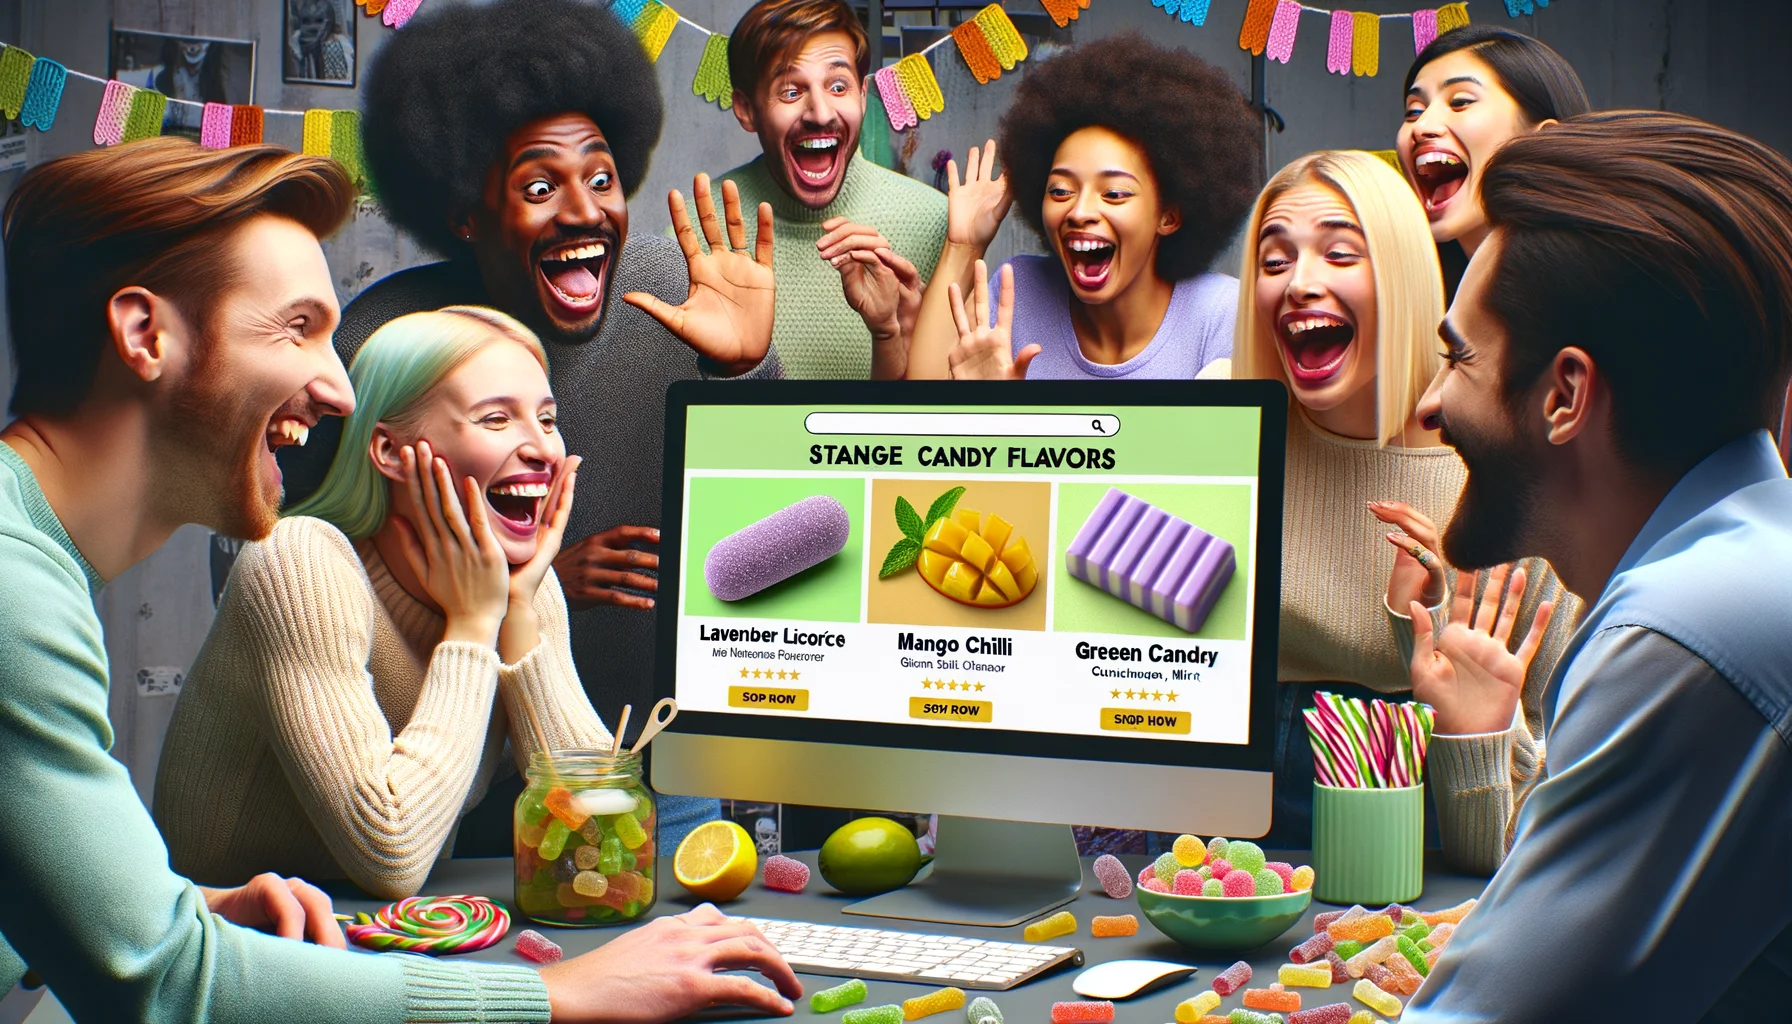 Create a humor-filled scene of an online shopping experience where unique candy flavors with lively colors are being showcased. A chartreuse computer screen dominates the foreground, displaying the images of candies with exotic flavors like lavender licorice, mango chilli, and green tea mints. The background is filled with joyful reactions of a group of friends viewing these unconventional options. Caucasian woman is seen laughing heartily at a 'wasabi gummy bear', while a Black man is intrigued at a 'pickle flavored lollipop'. A Middle-Eastern woman shows excitement for a 'honey-cinnamon hard candy'. Let this galore of strange, sweet treats tell a story of diversity, excitement and fun.